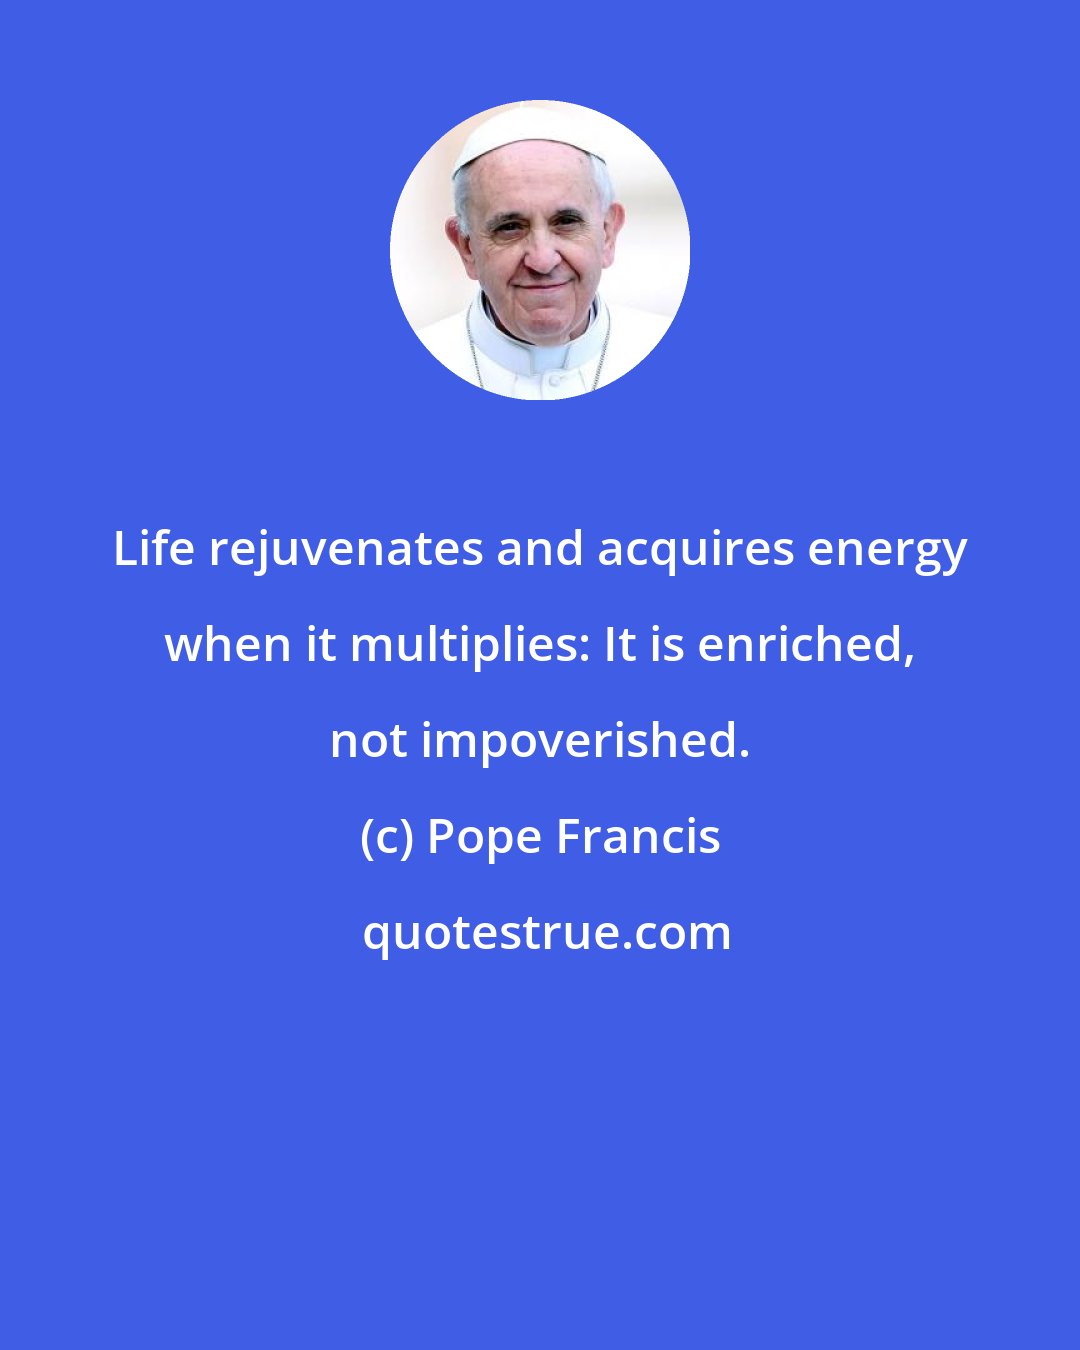 Pope Francis: Life rejuvenates and acquires energy when it multiplies: It is enriched, not impoverished.